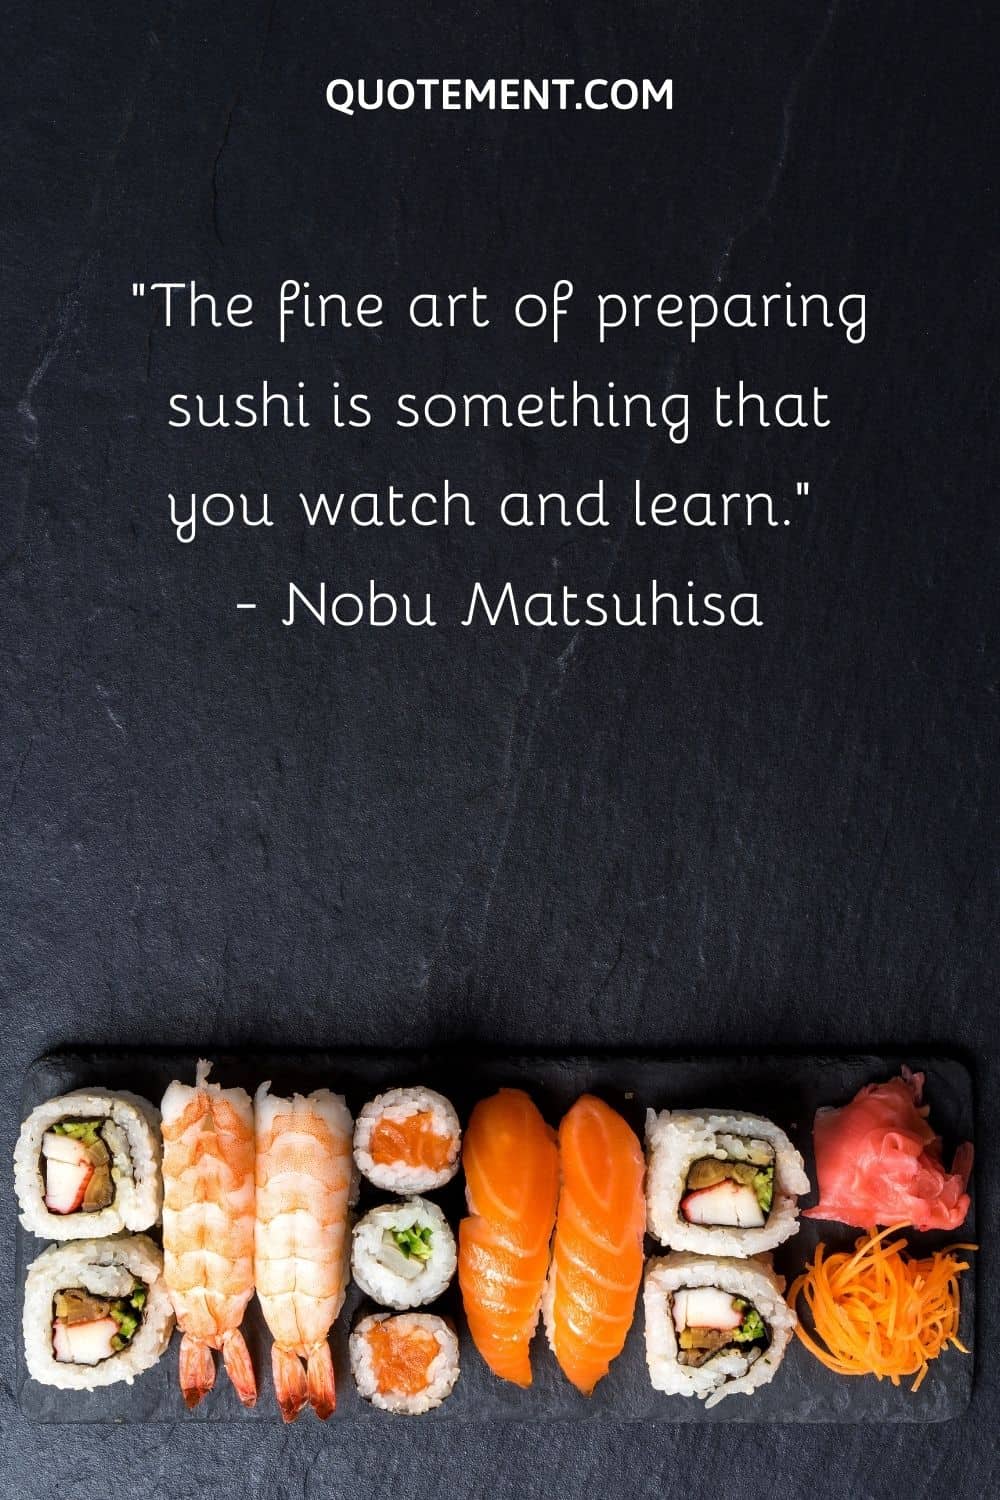 The fine art of preparing sushi is something that you watch and learn.